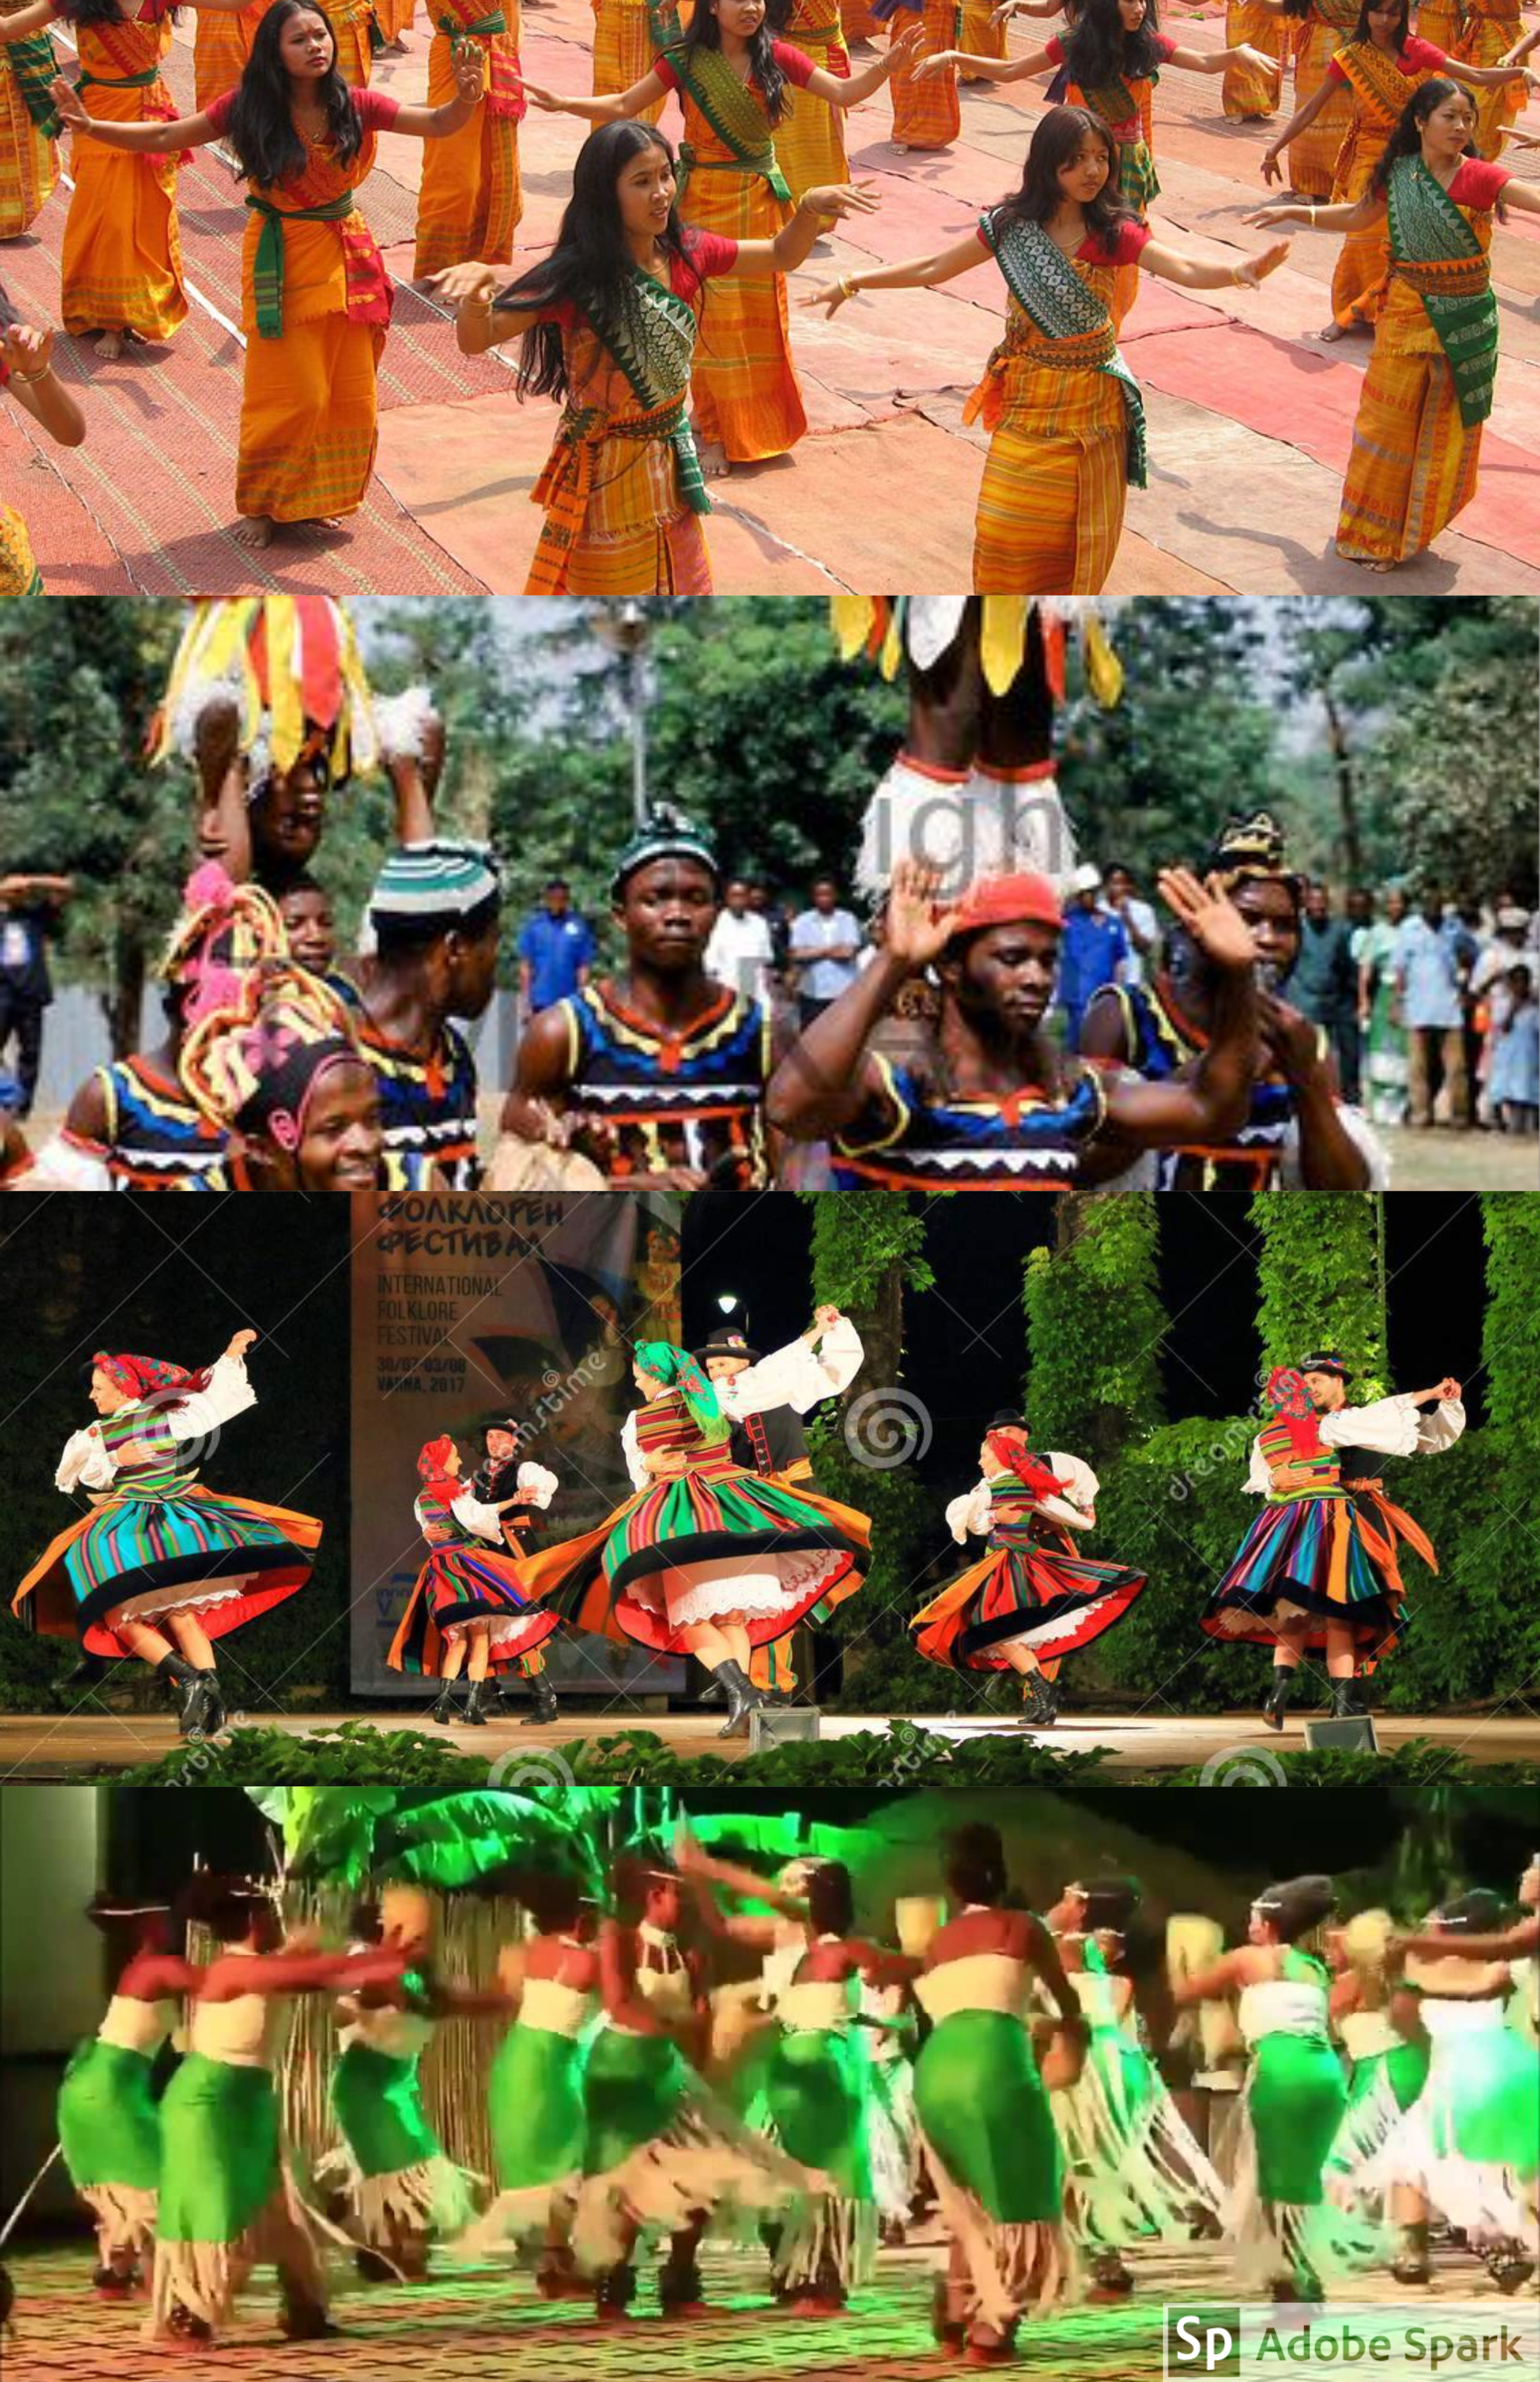 This image shows some Polish and Rwandan Traditional Dancers to encourage people to come.